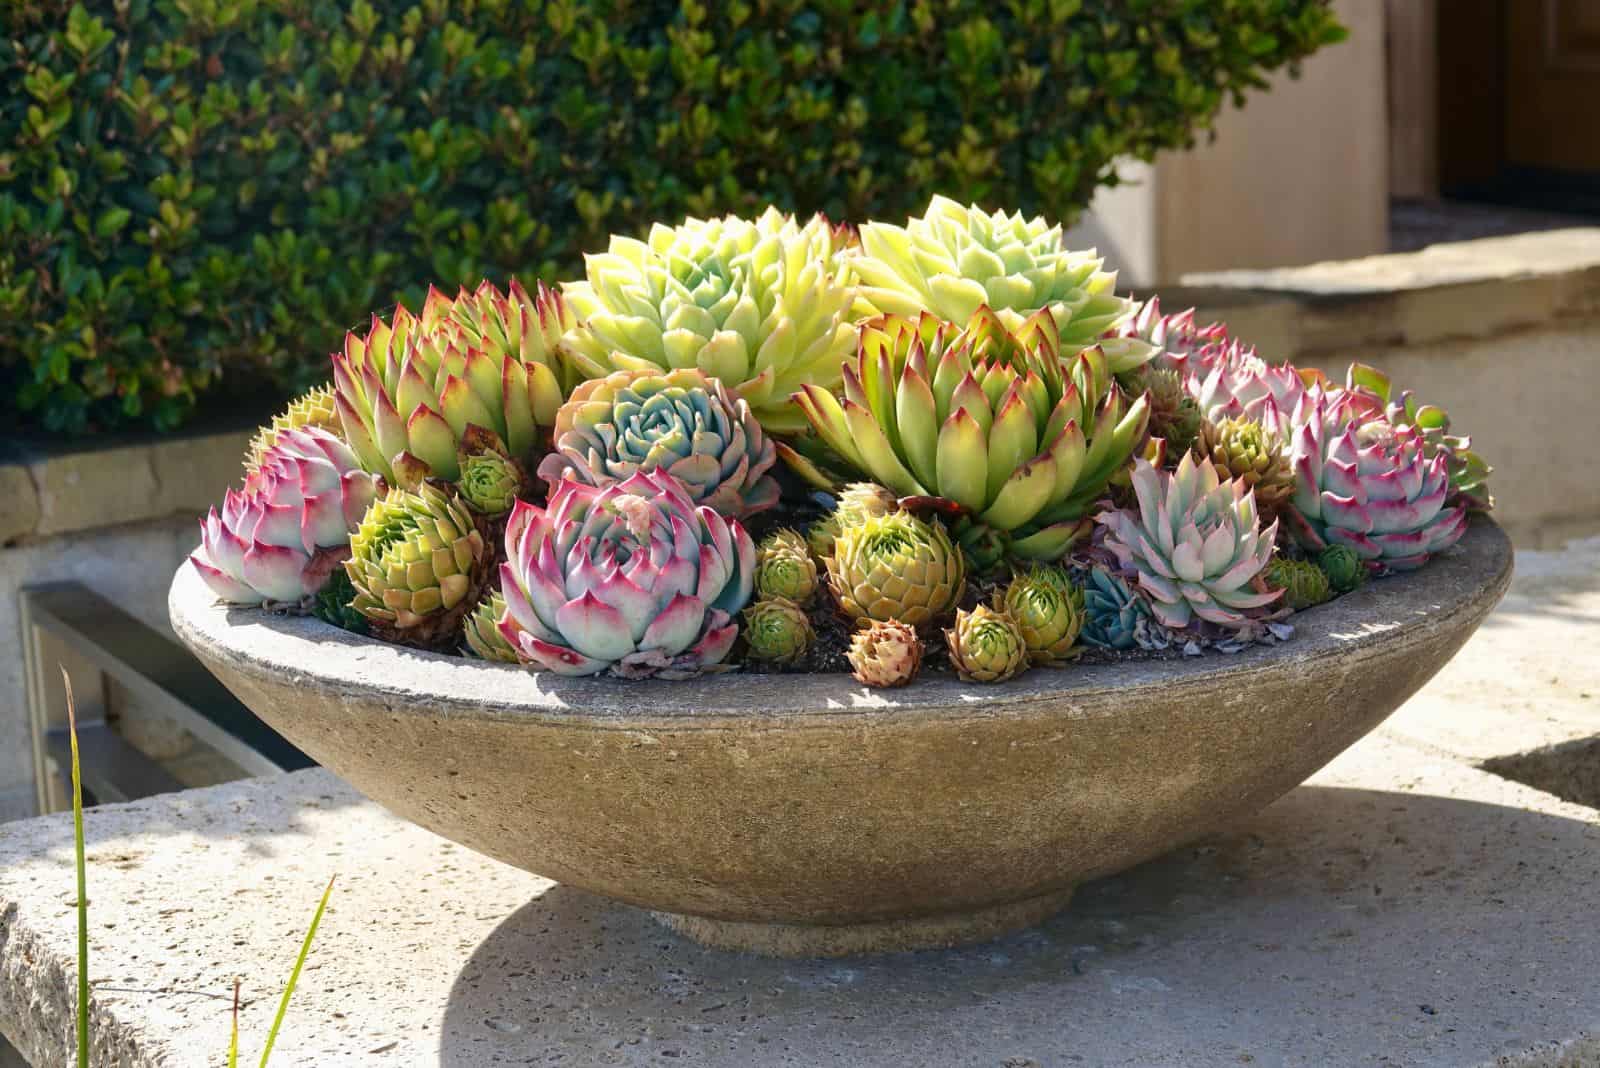 ornamental succulents arranged in a large bowl